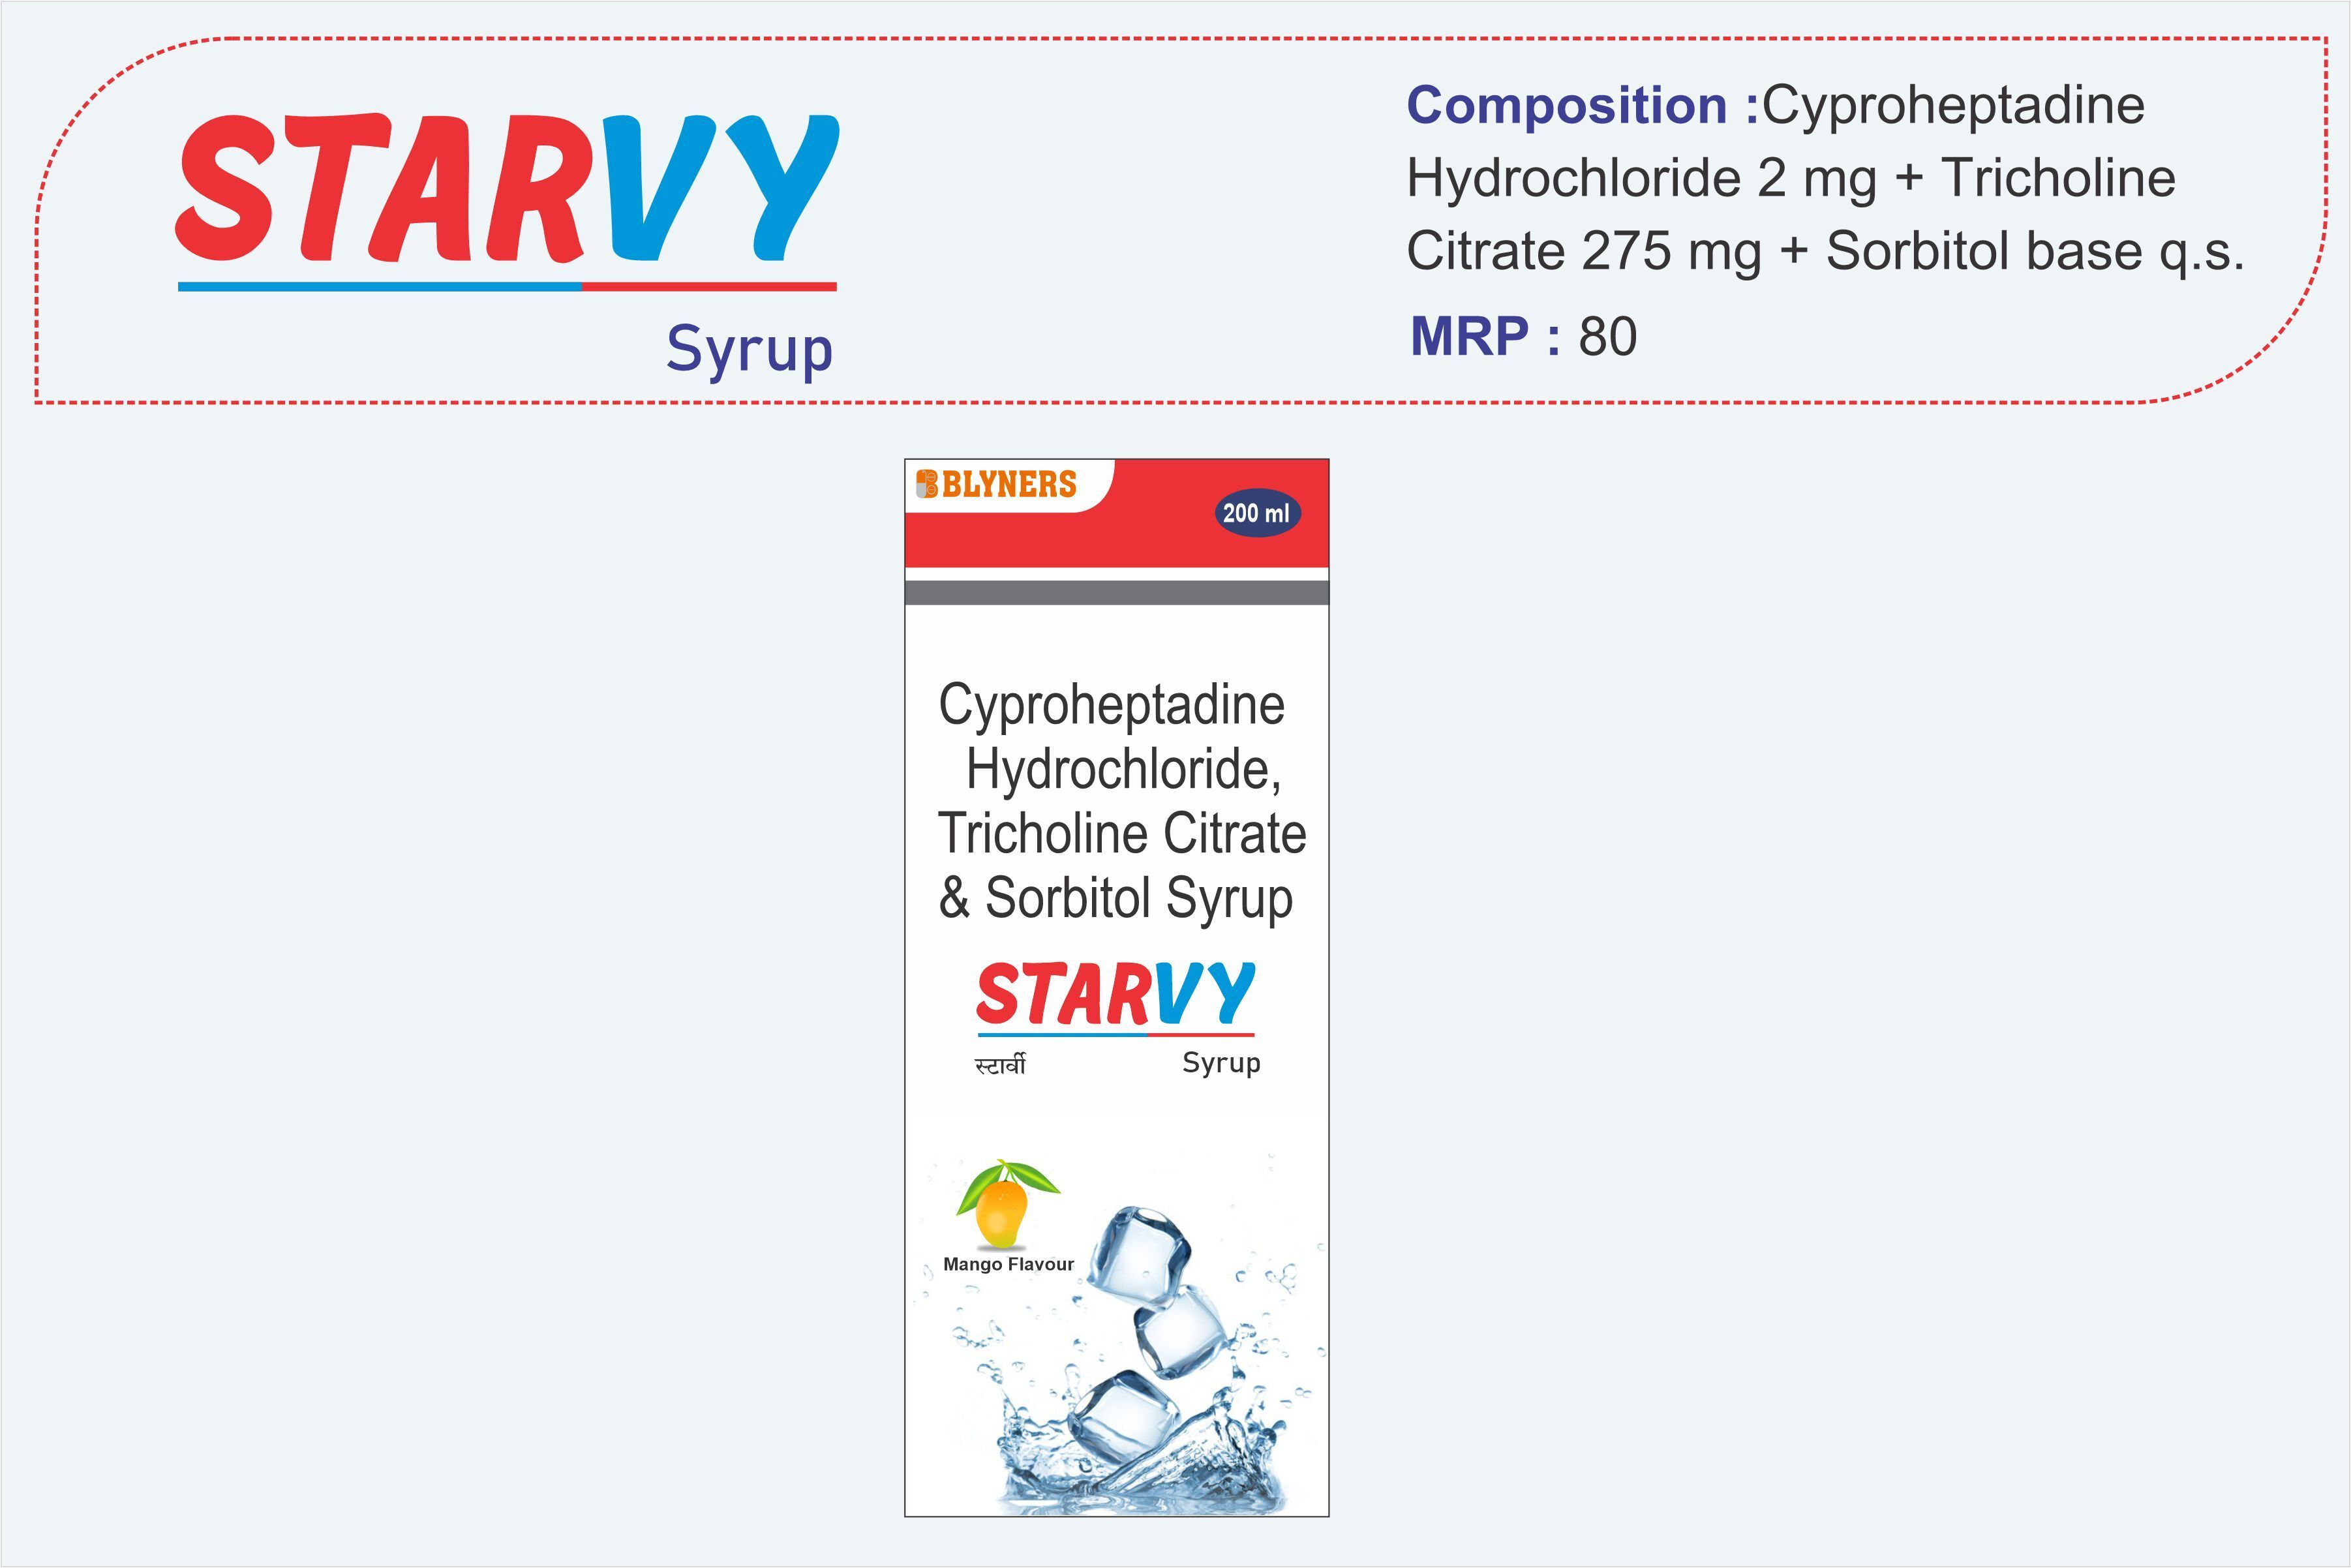 Cyproheptidine Tricholine and Sorbitol Syrup